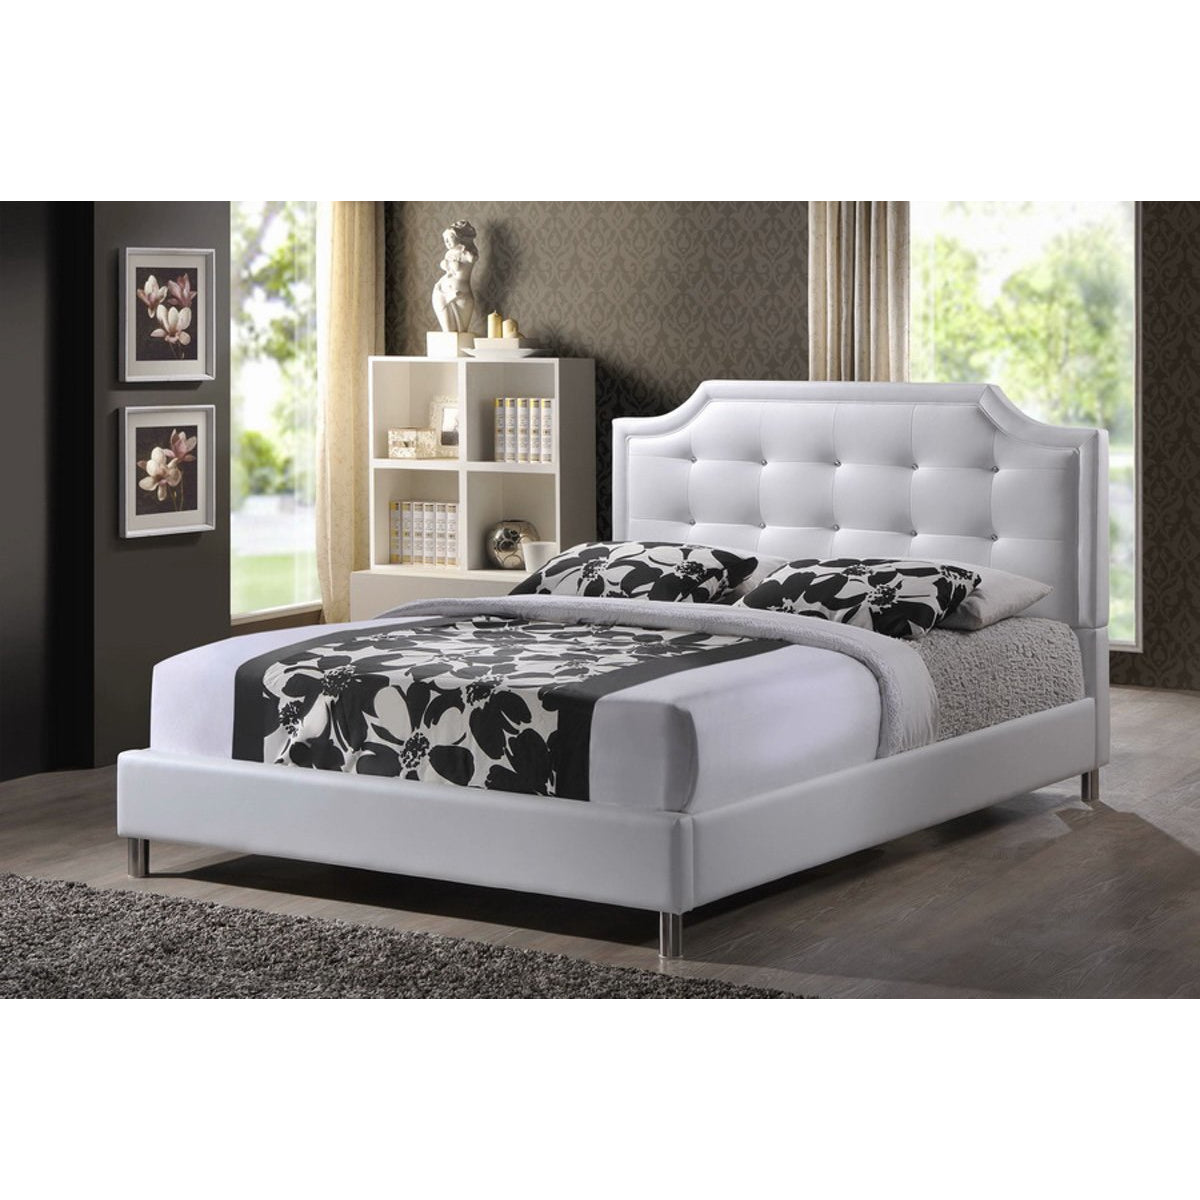 Baxton Studio Carlotta White Modern Bed with Upholstered Headboard - Queen Size Baxton Studio-beds-Minimal And Modern - 1